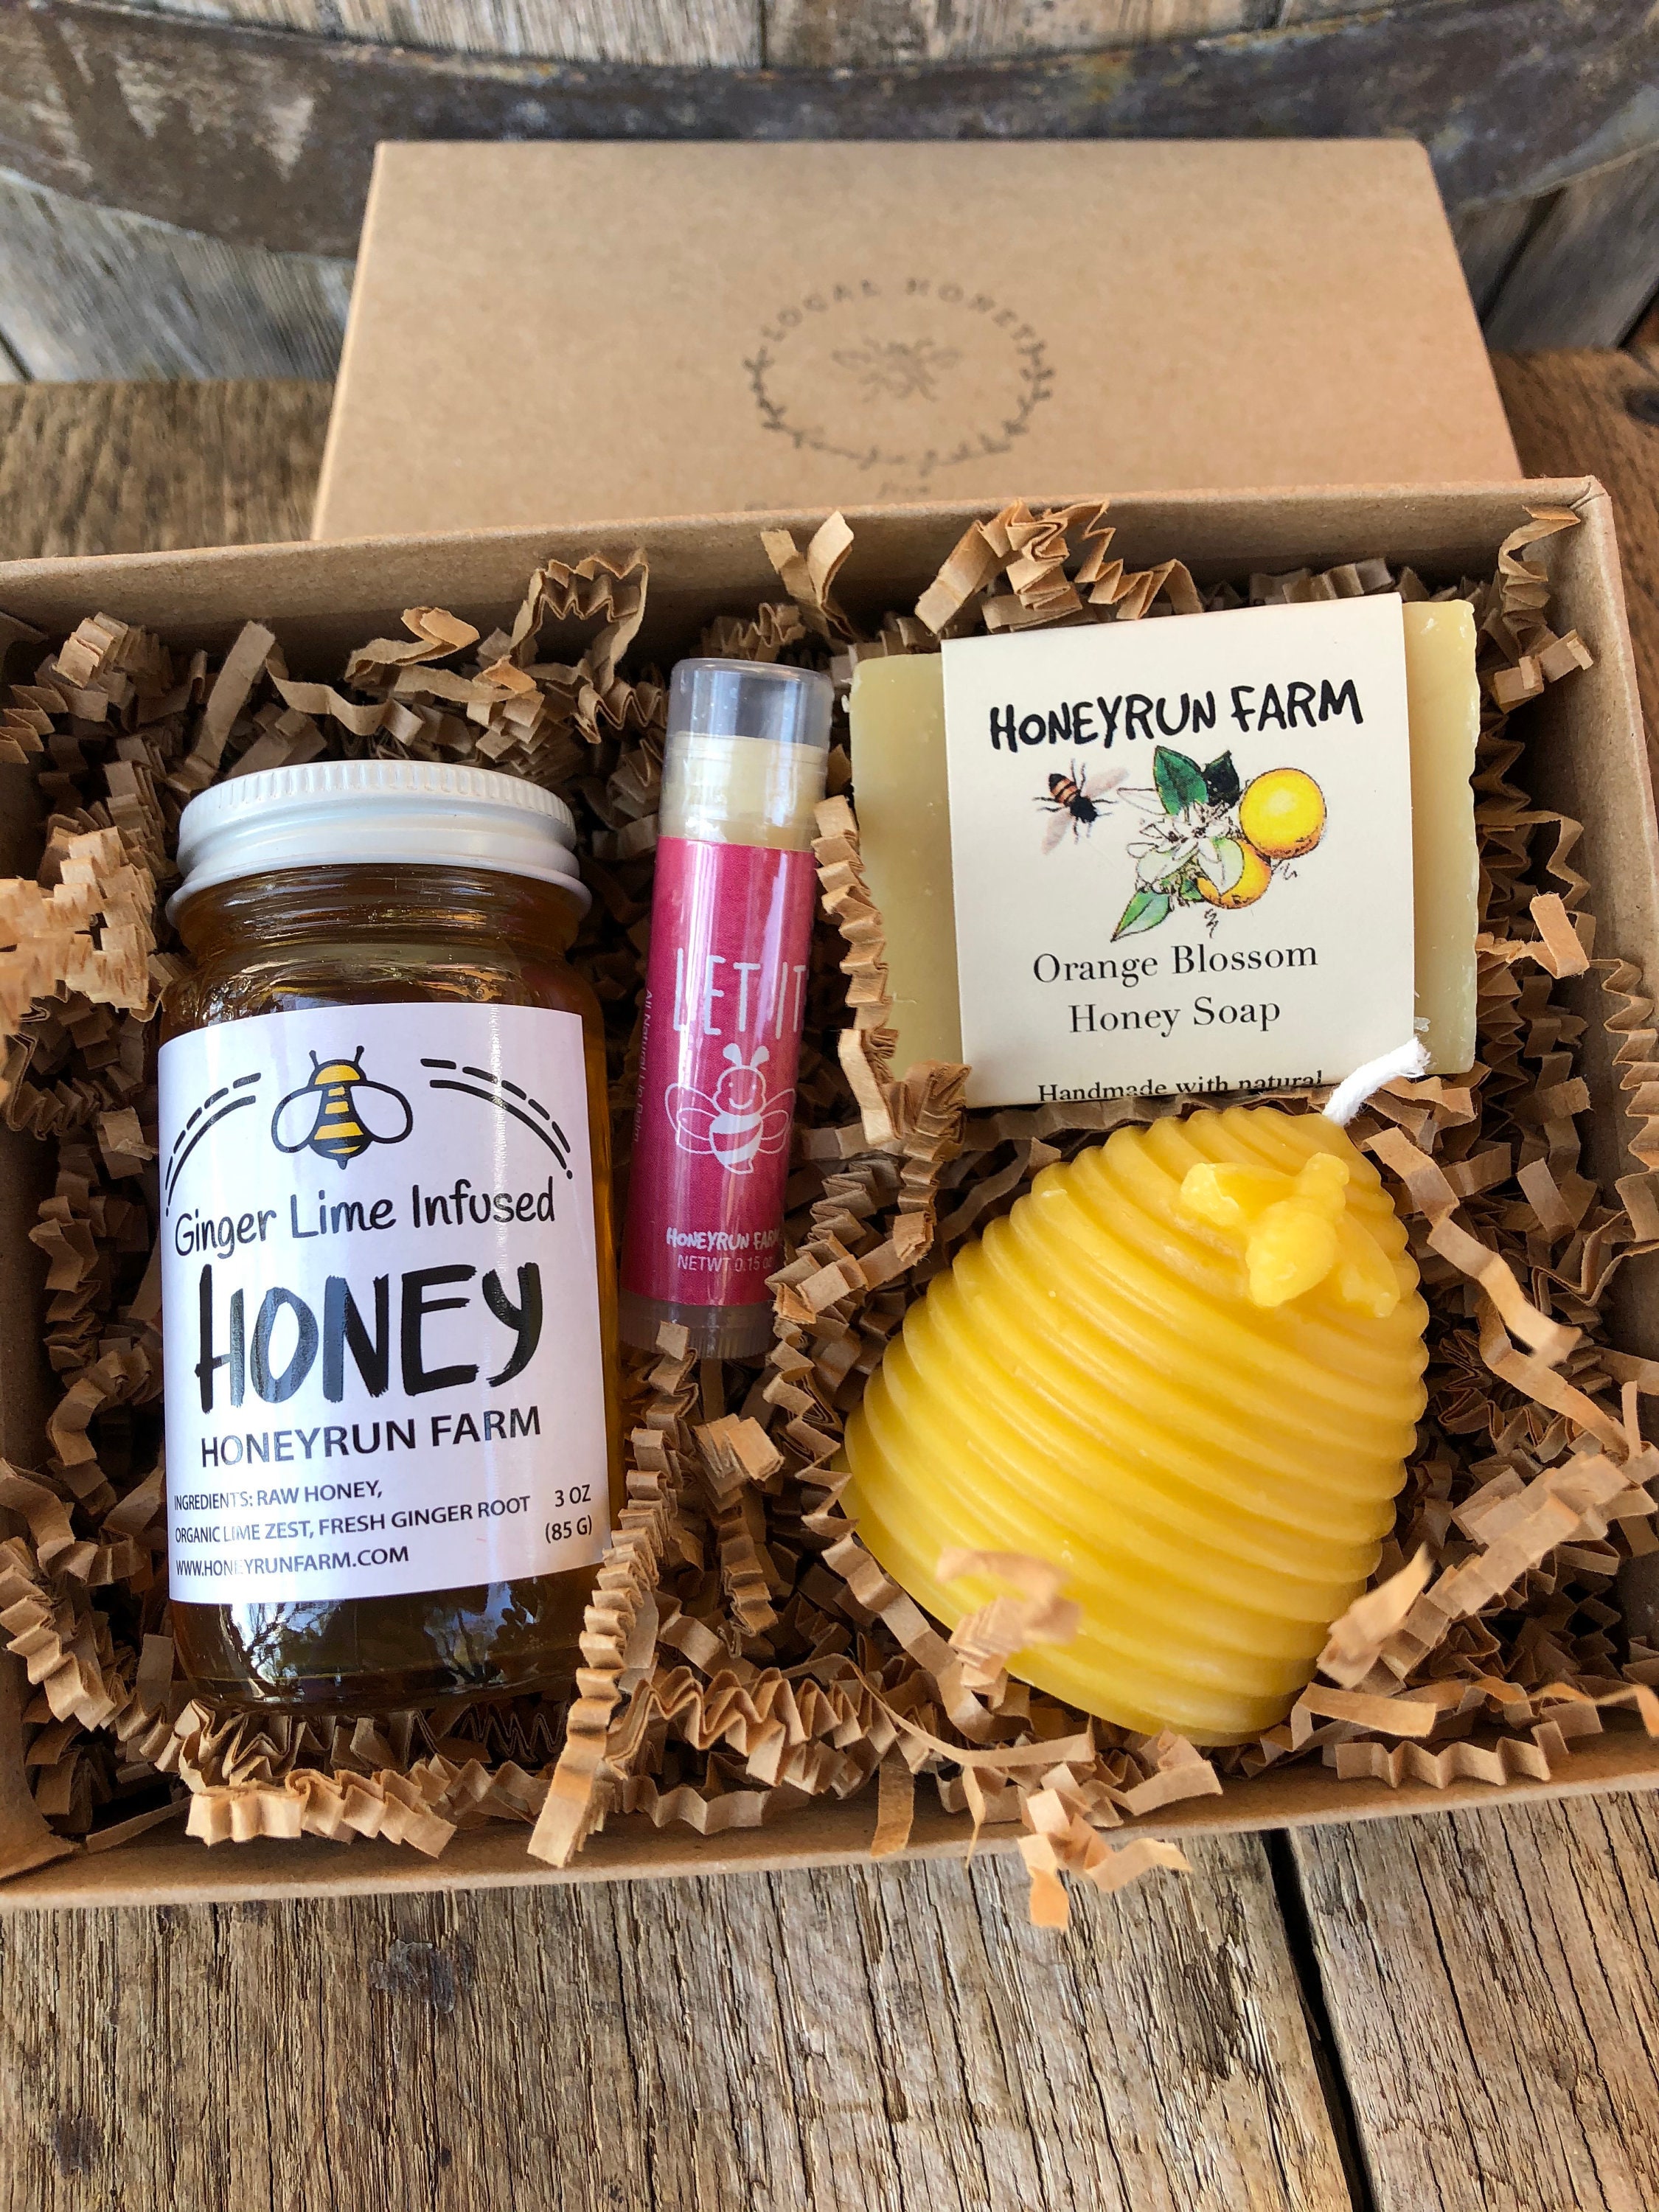 DELUXE HONEY AND HIVE GIFT BASKET RAW HONEY, BEESWAX CANDLE AND HANDMADE  SOAP. UNIQUE GOURMET GIFT BASKET DELIVERED